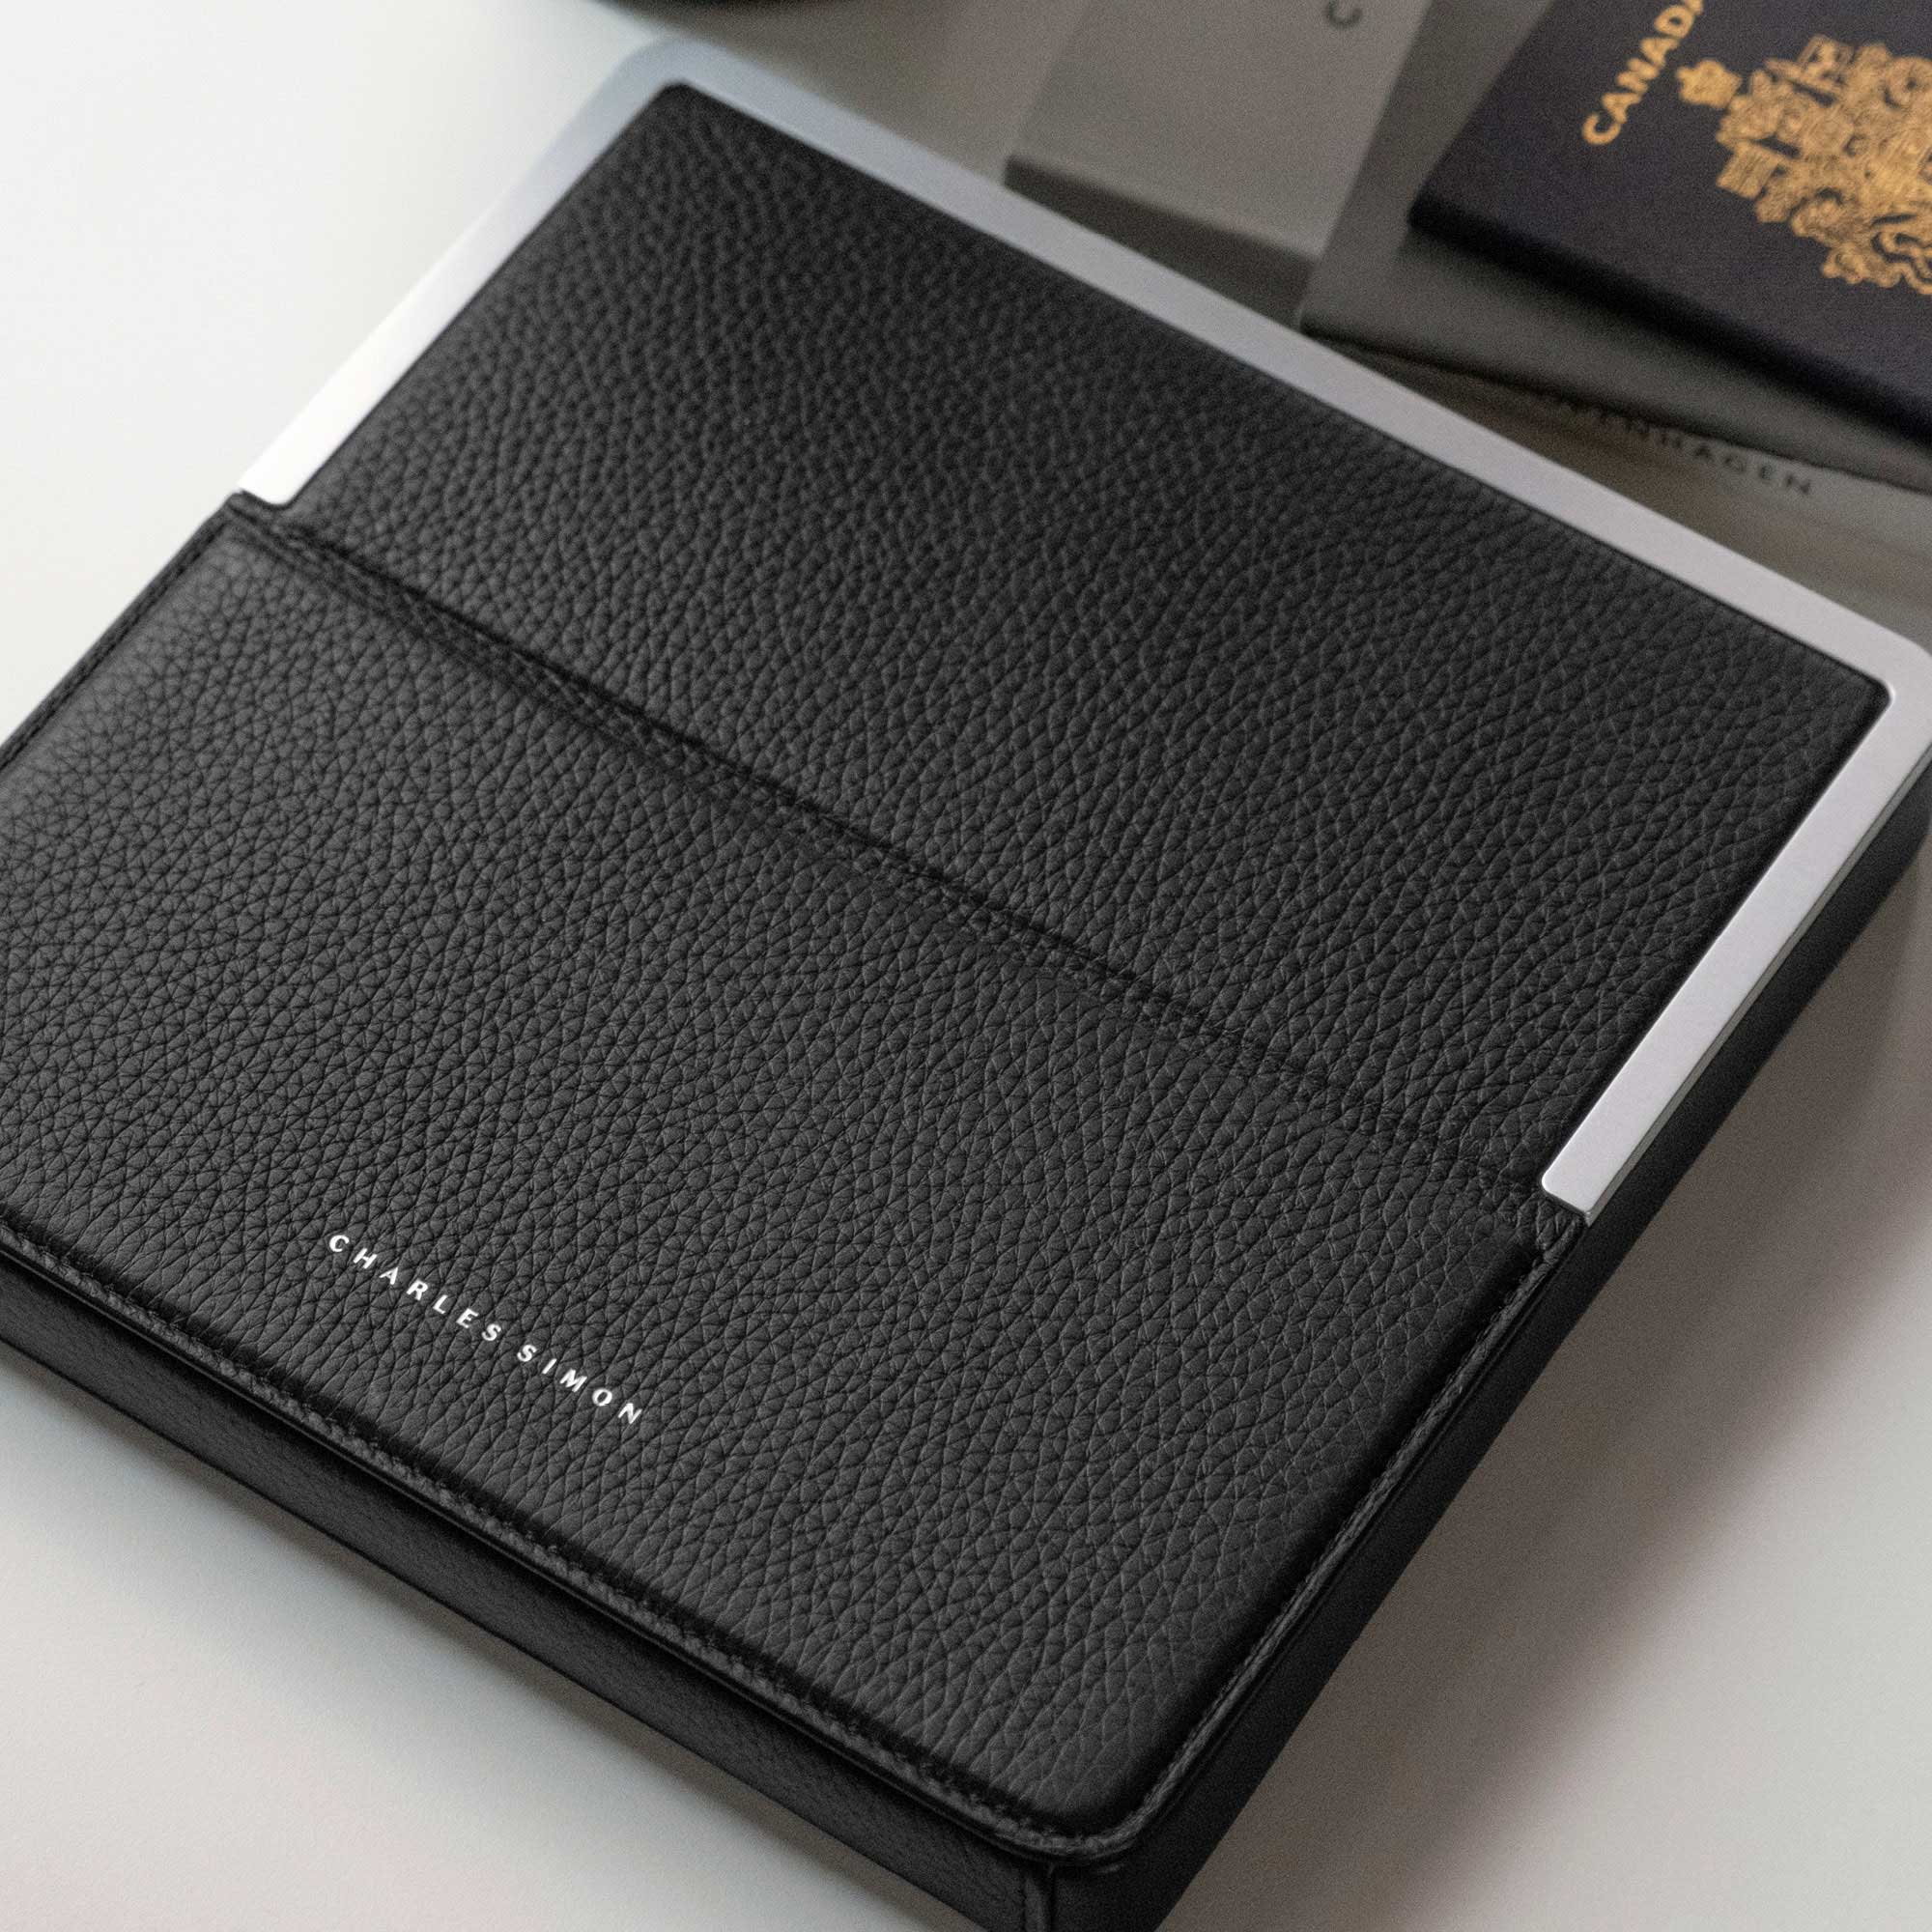 Lifestyle photo showcasing the black leather and grey aluminum premium materials and sleek, elegant design of the Fraser Travel wallet